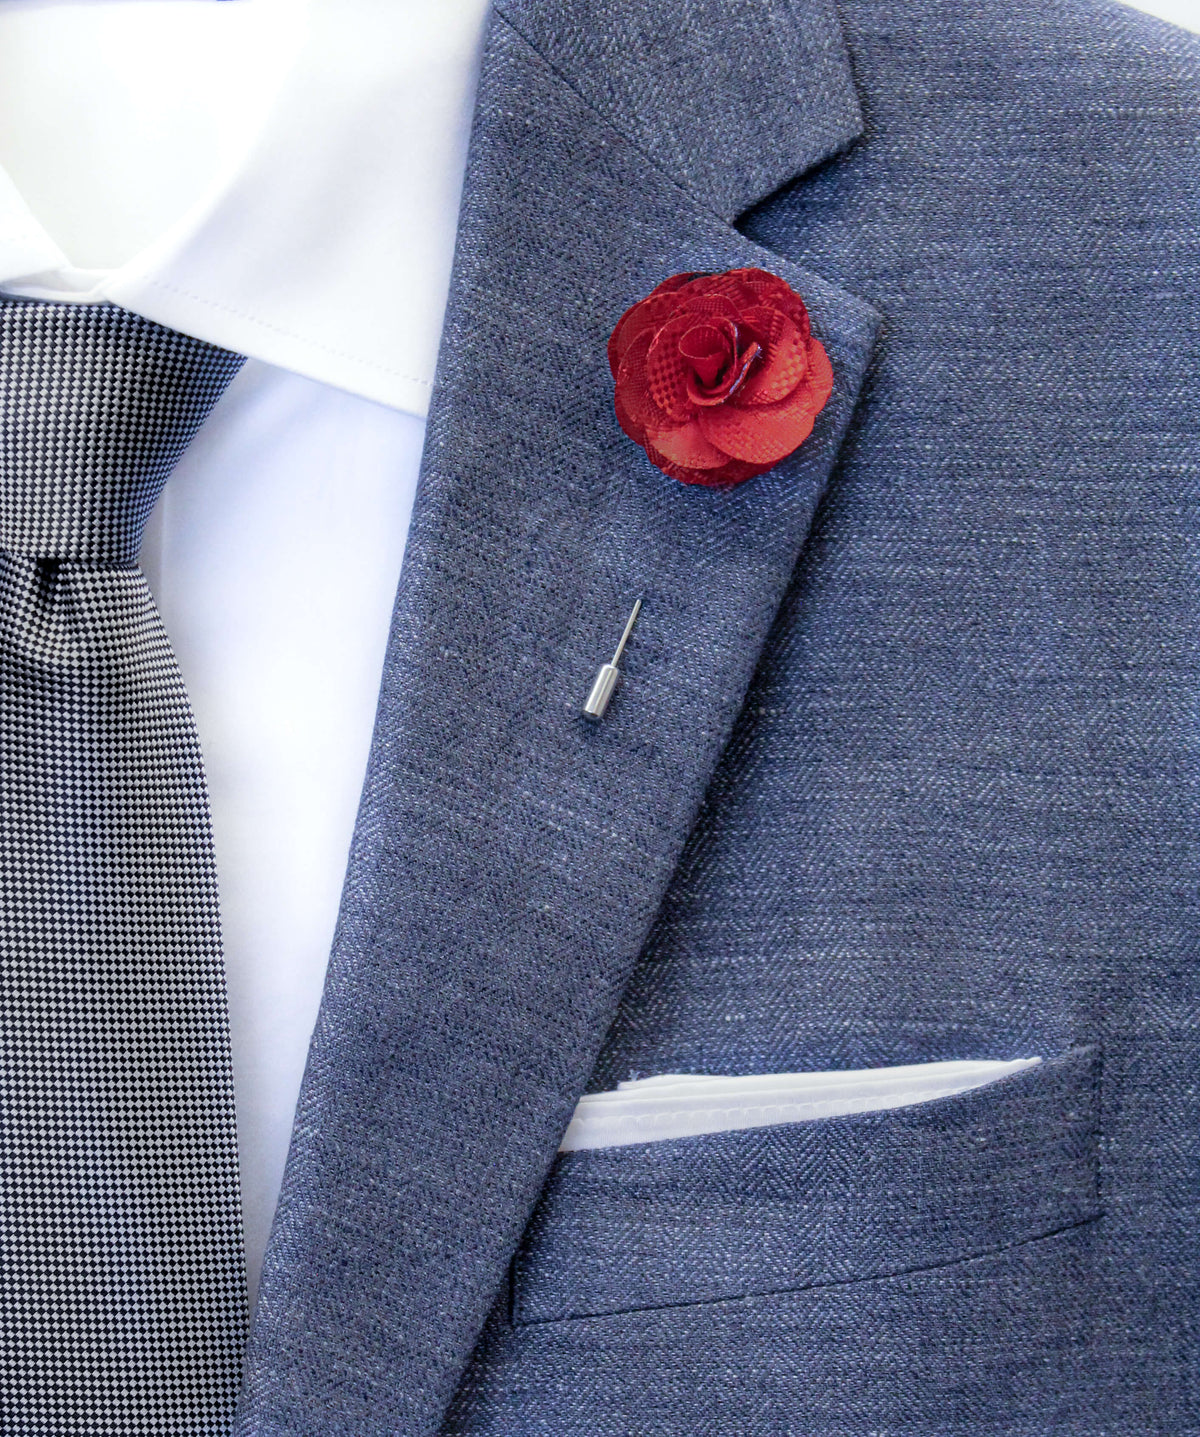 Classically Cool Red Flower Lapel Pin